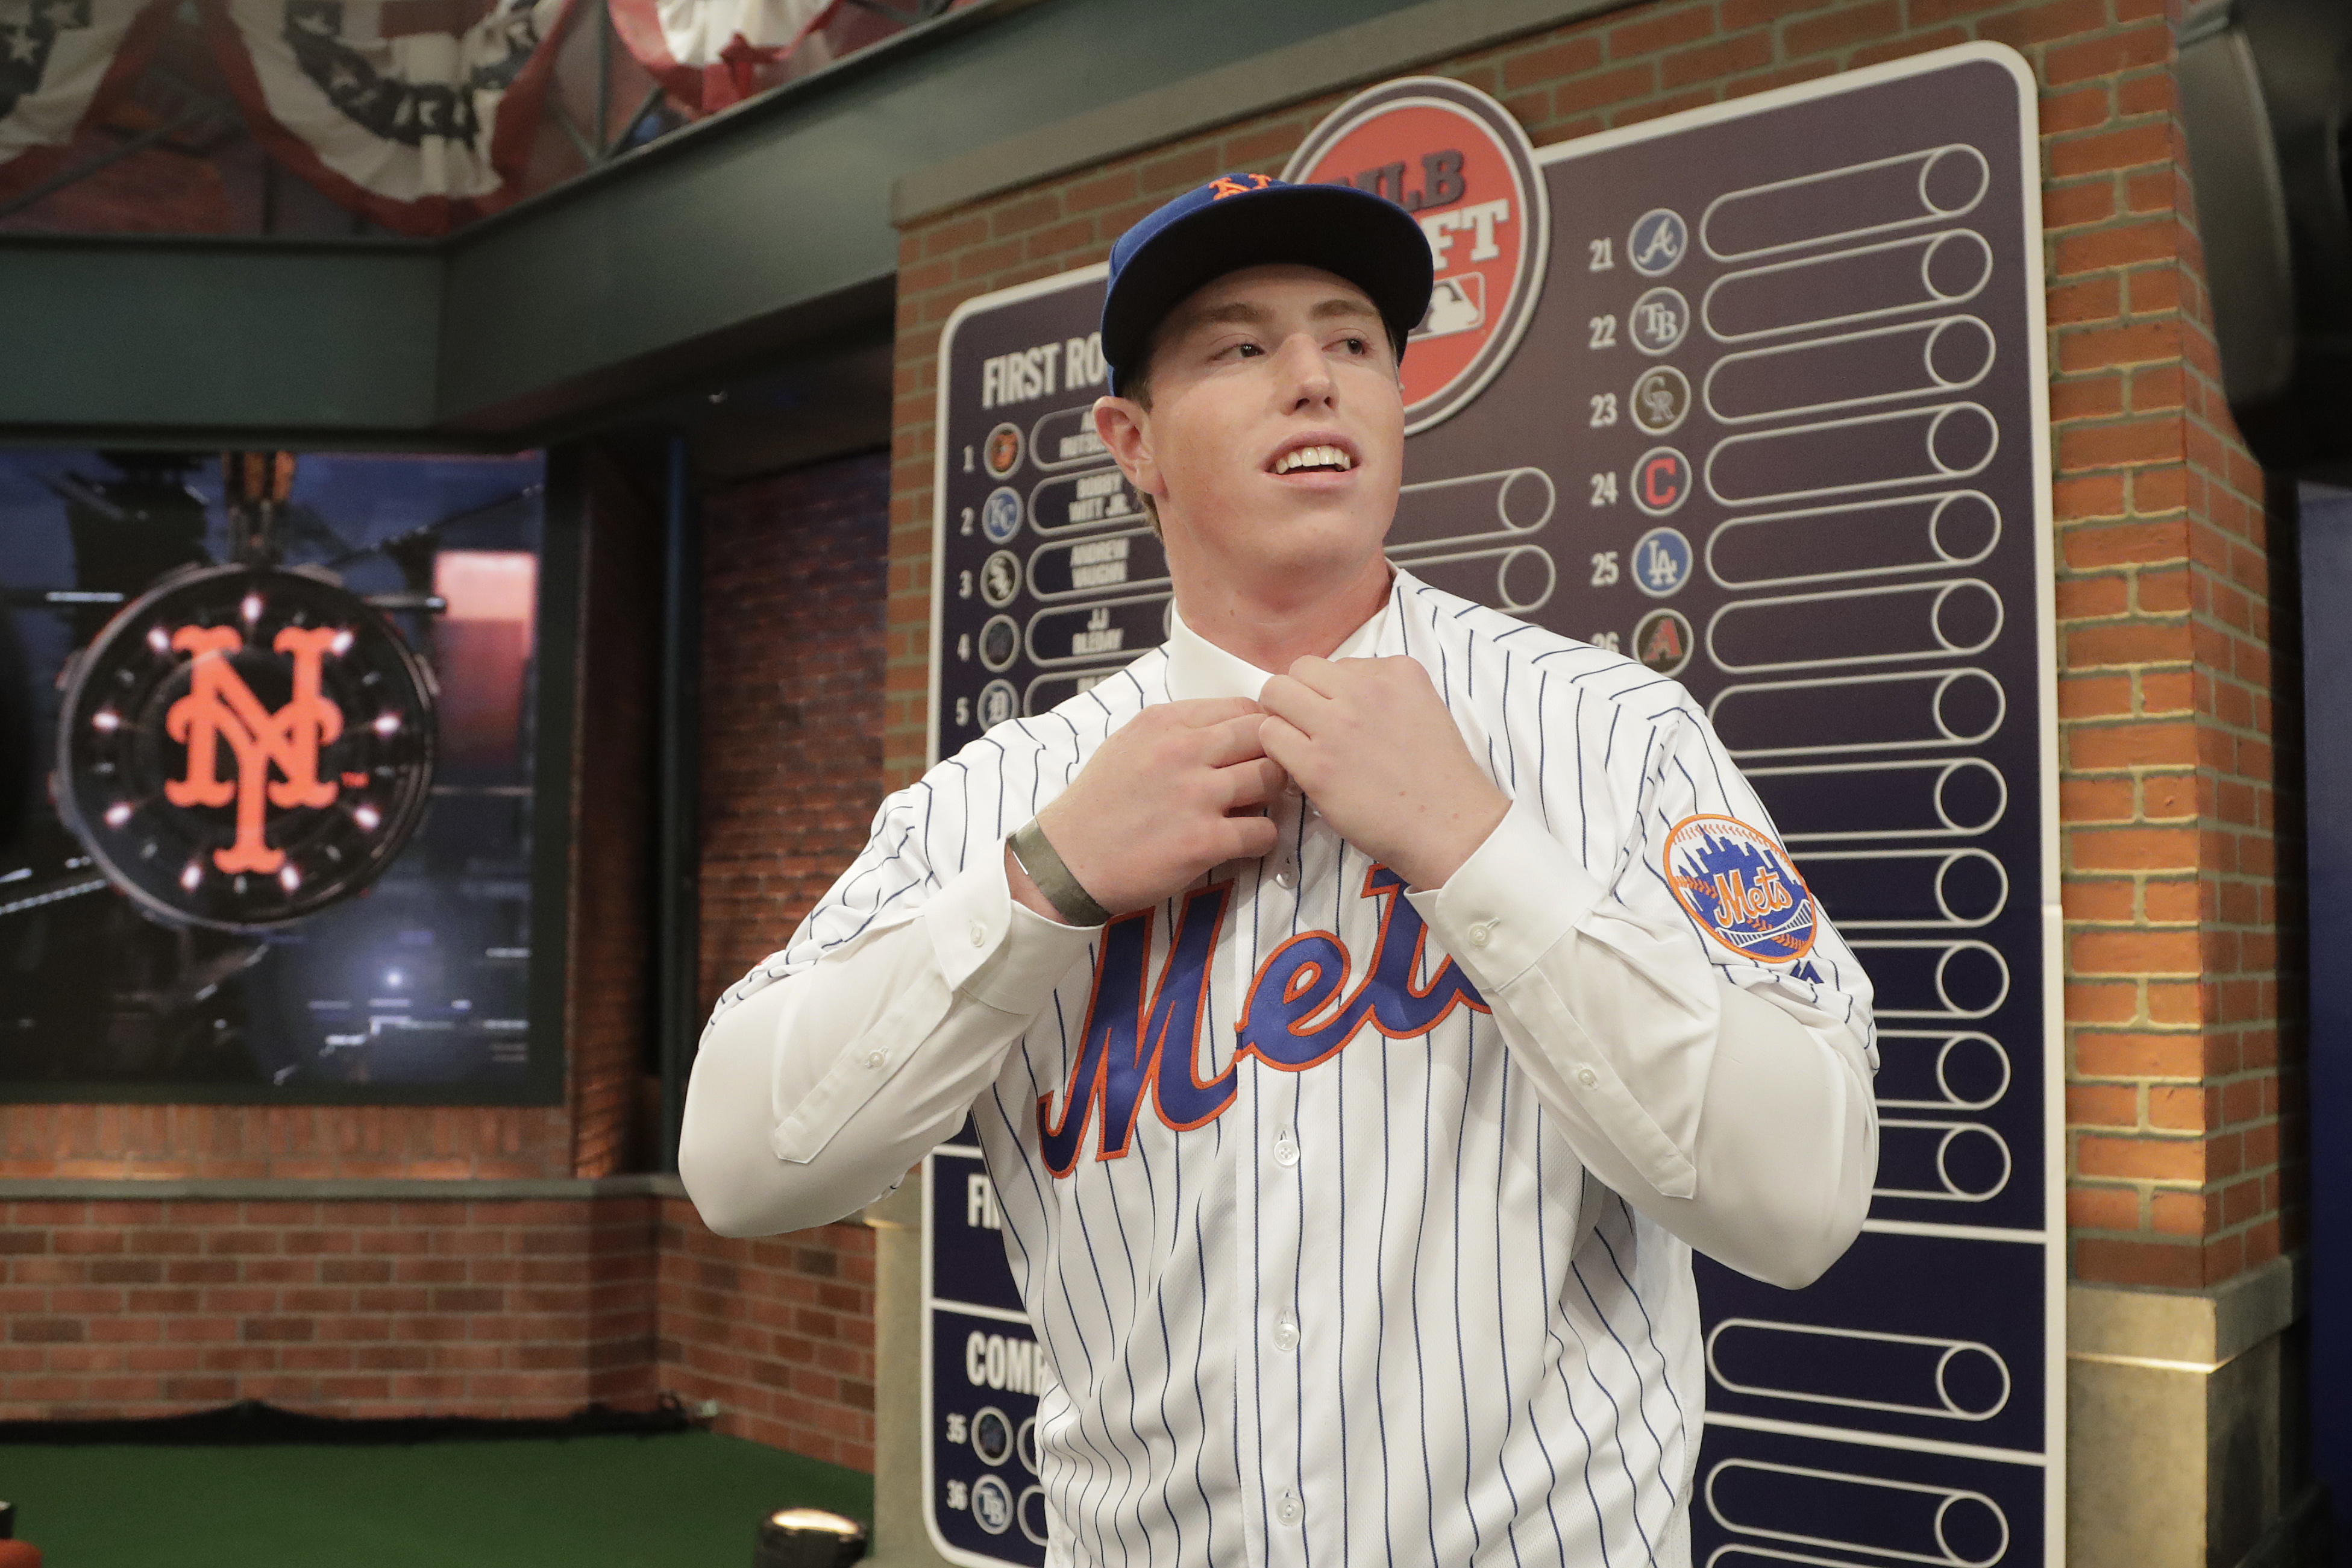 Texas prep star Brett Baty was the Mets’ first-round pick in last week’s MLB Draft. The third baseman could be headed to Brooklyn at some point this summer after he inks his deal with the big-league club and spends a little time at Rookie-level Kingsport. (AP Photo/Julio Cortez)